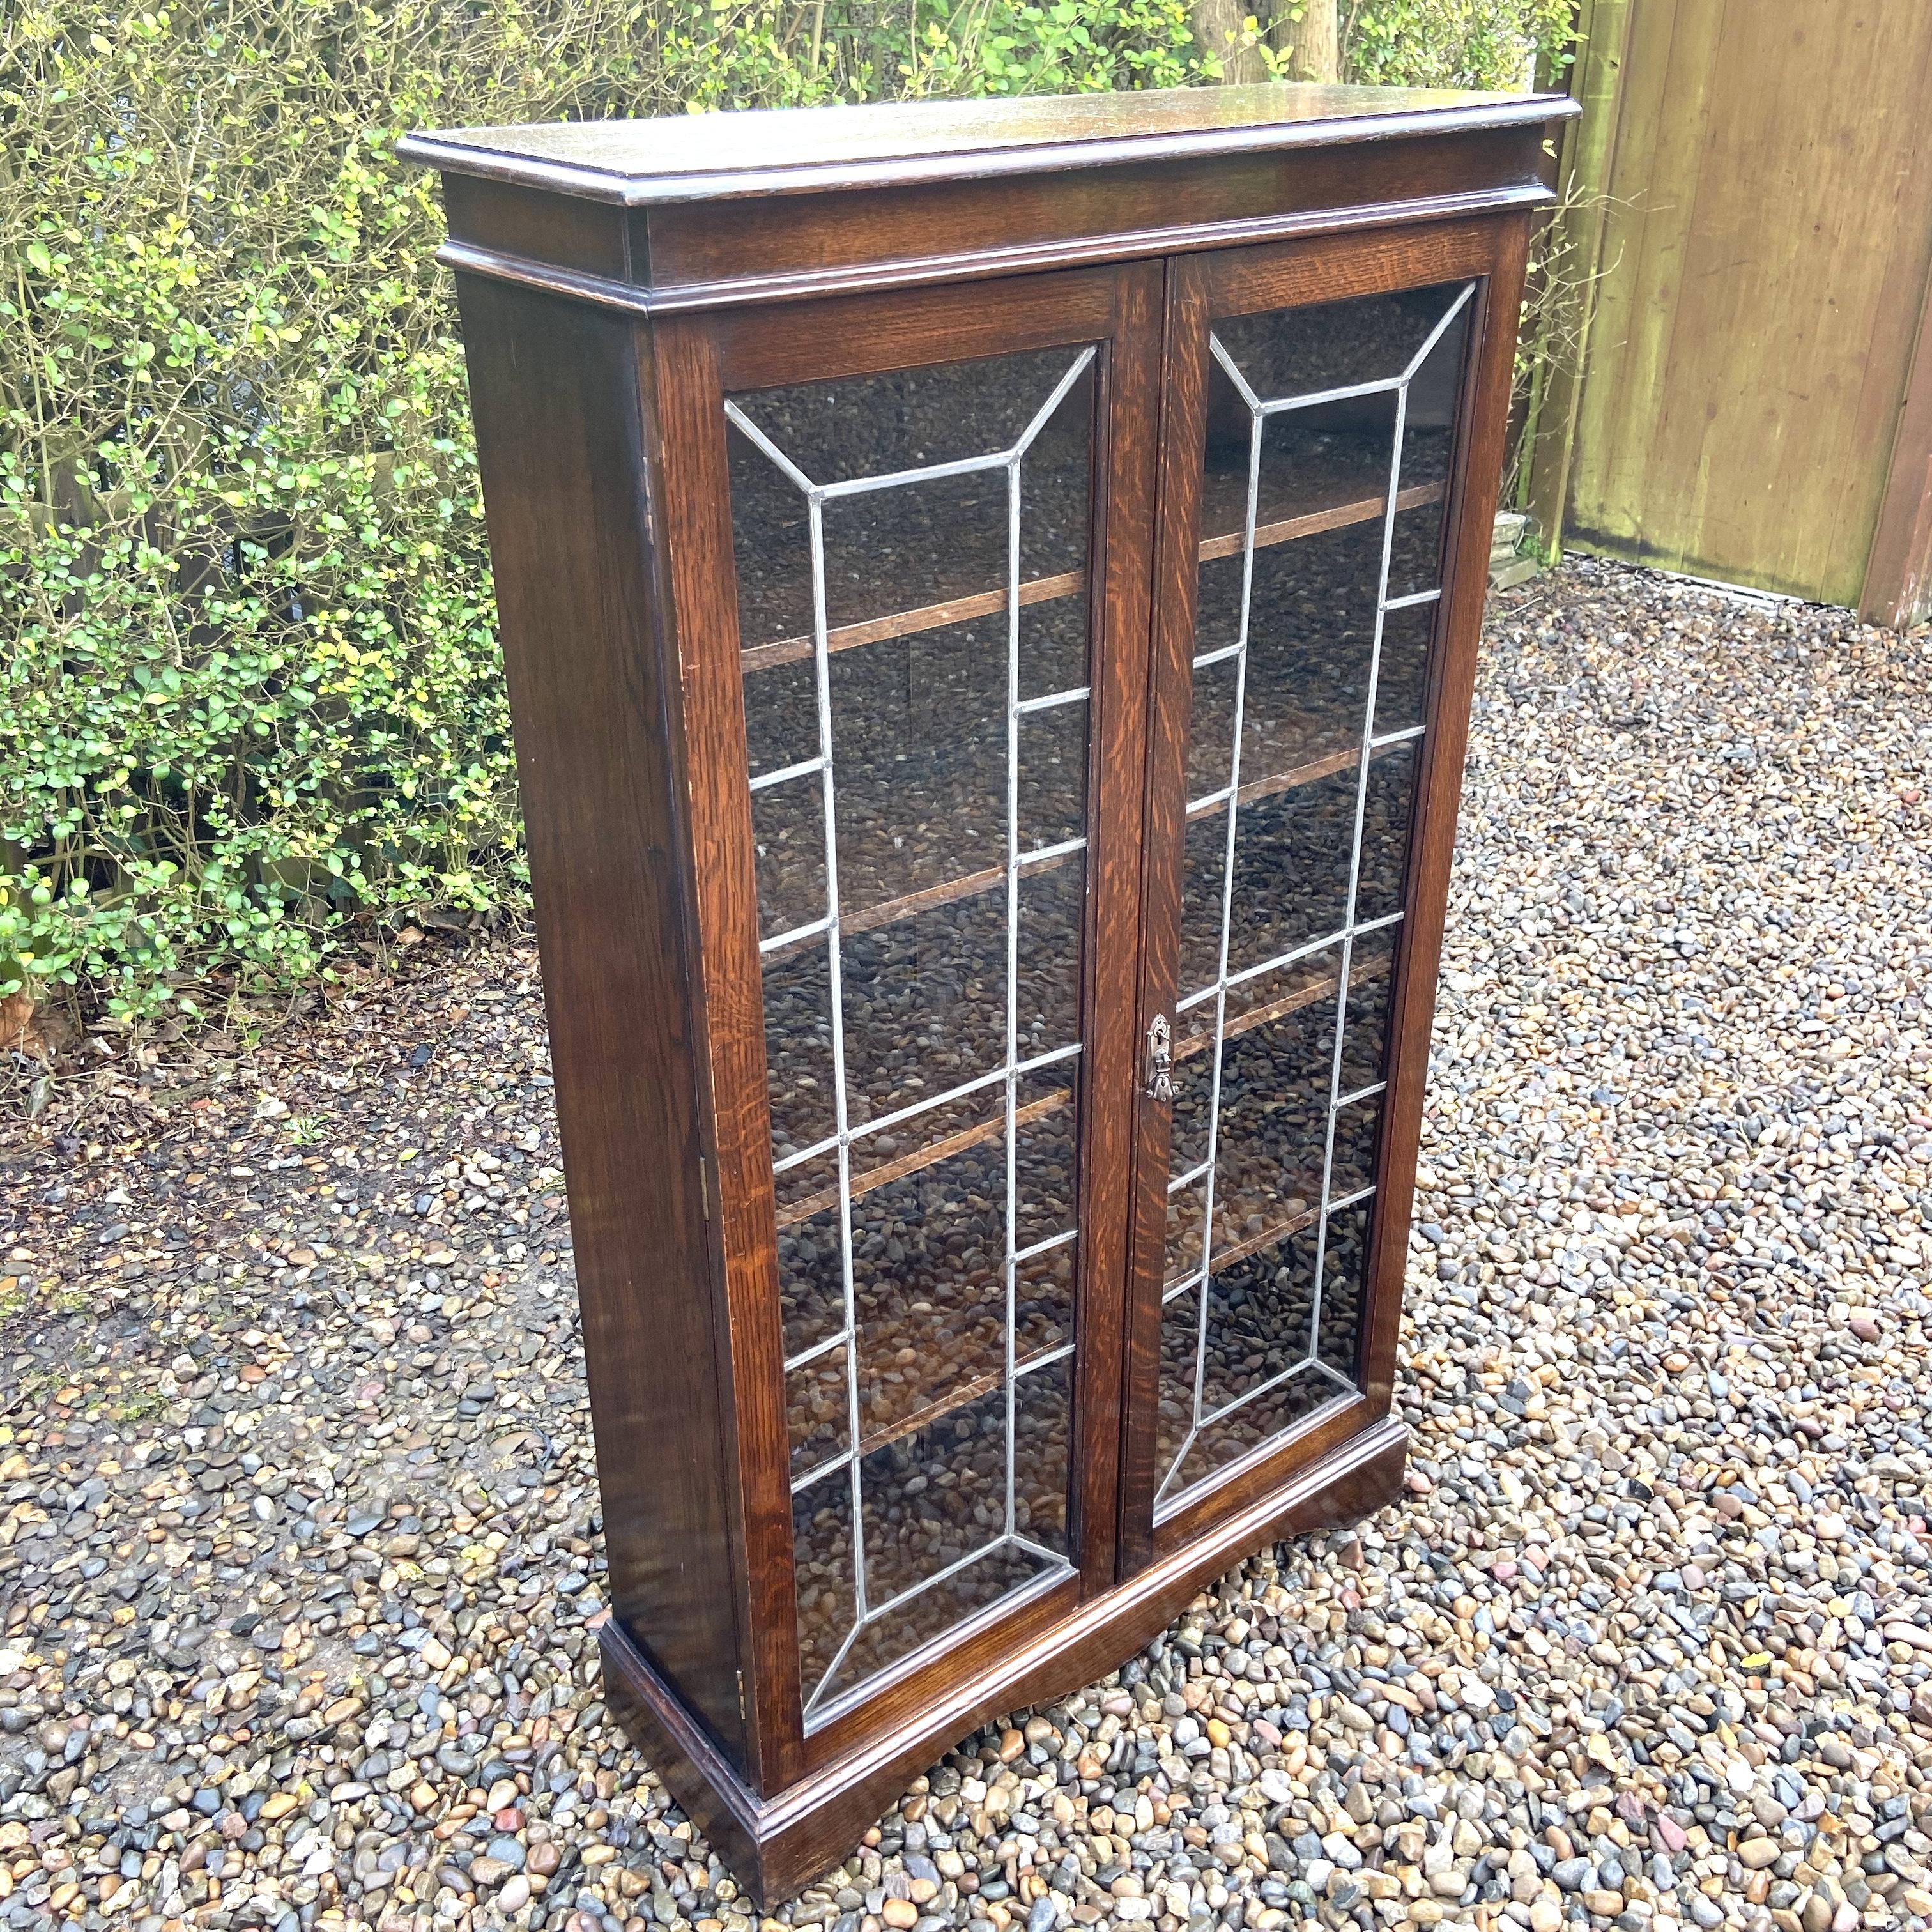 Oak Bookcase With Leaded Glass Doors Antique Bookcases Hemswell